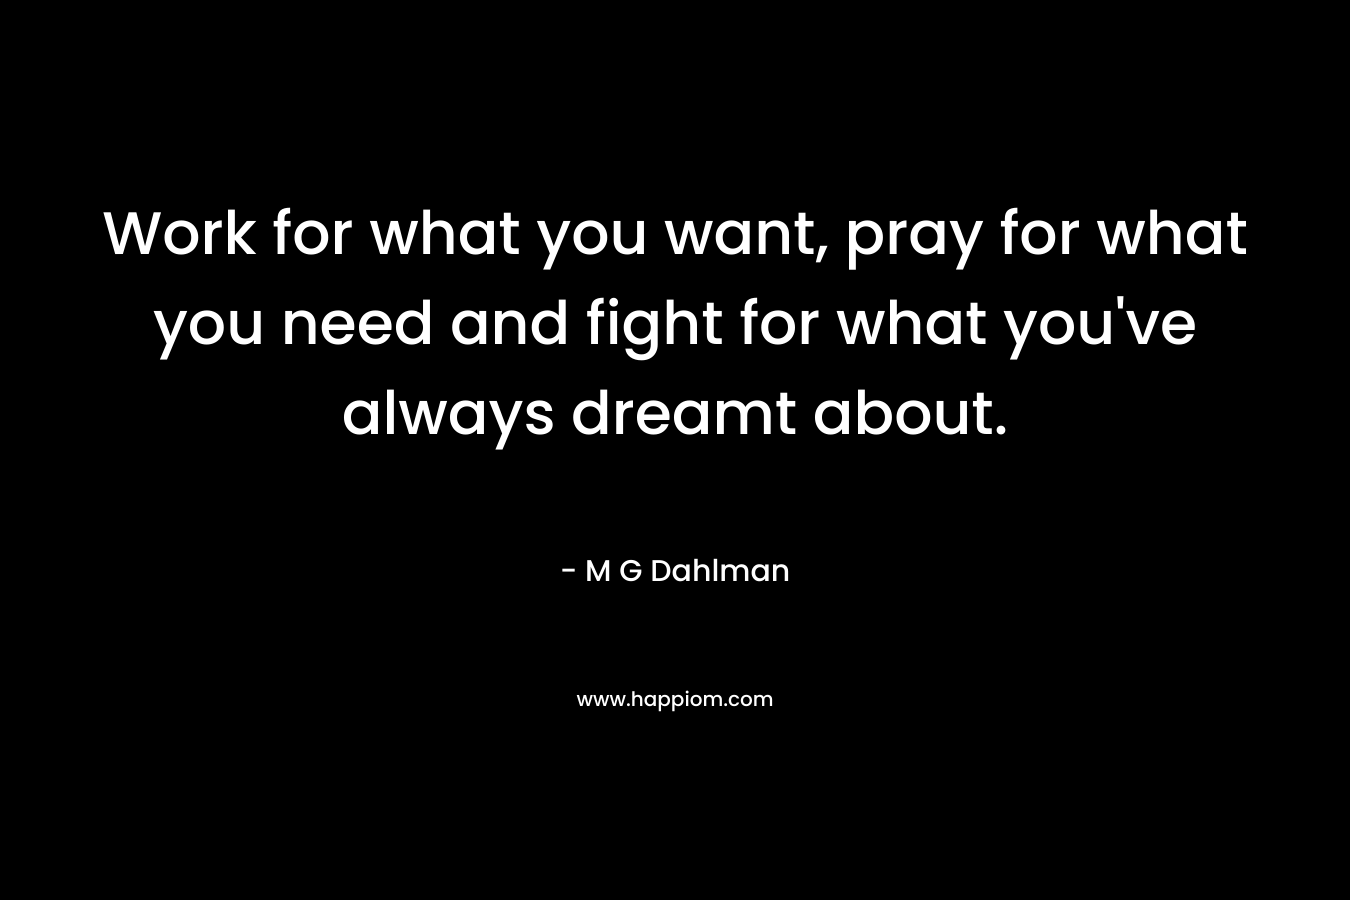 Work for what you want, pray for what you need and fight for what you’ve always dreamt about. – M G Dahlman